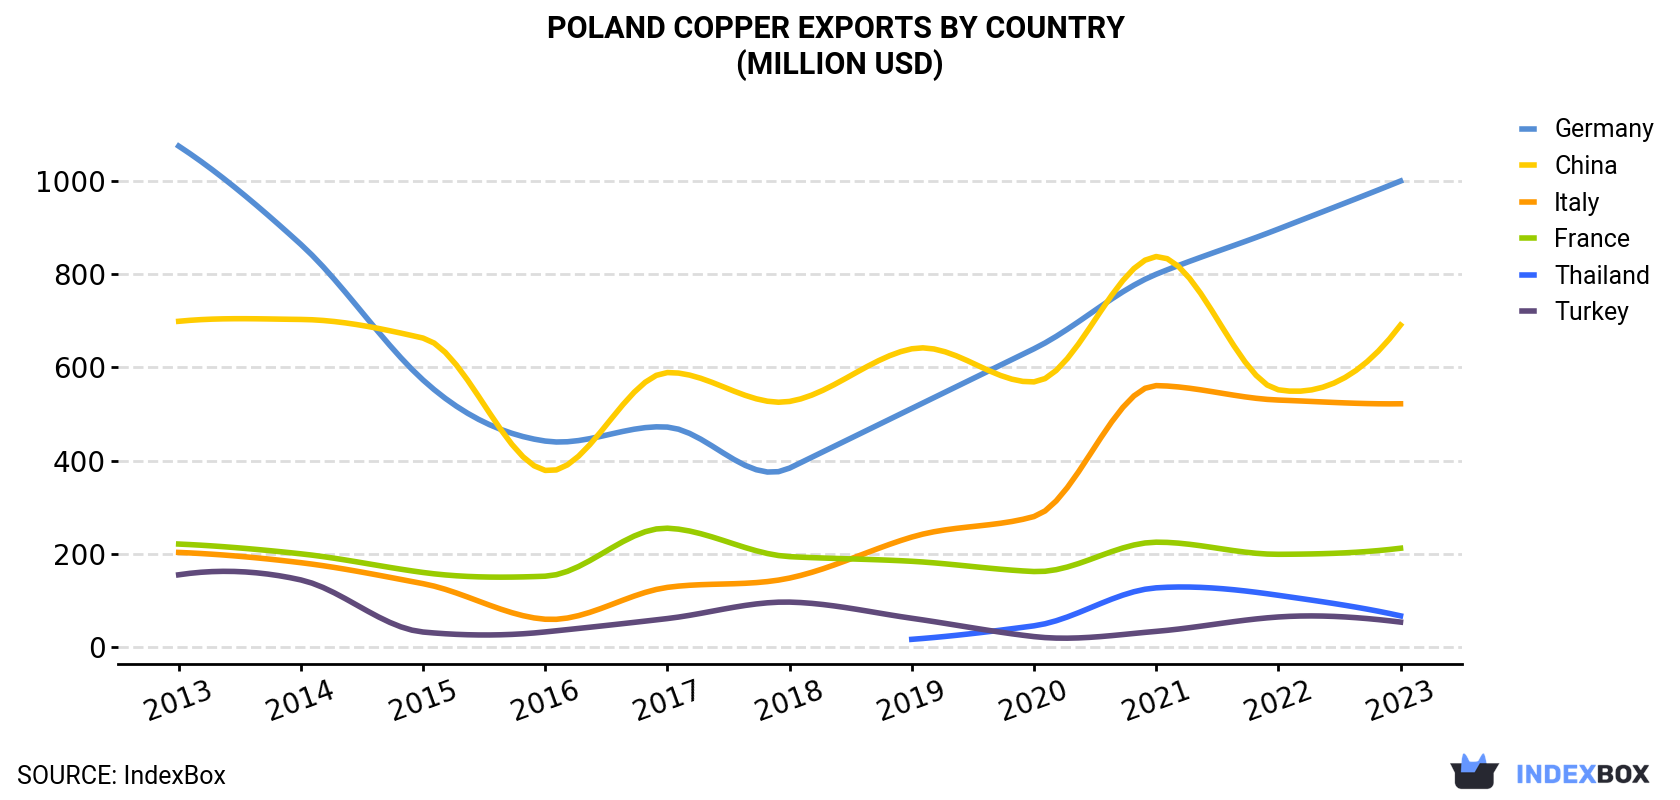 Poland Copper Exports By Country (Million USD)